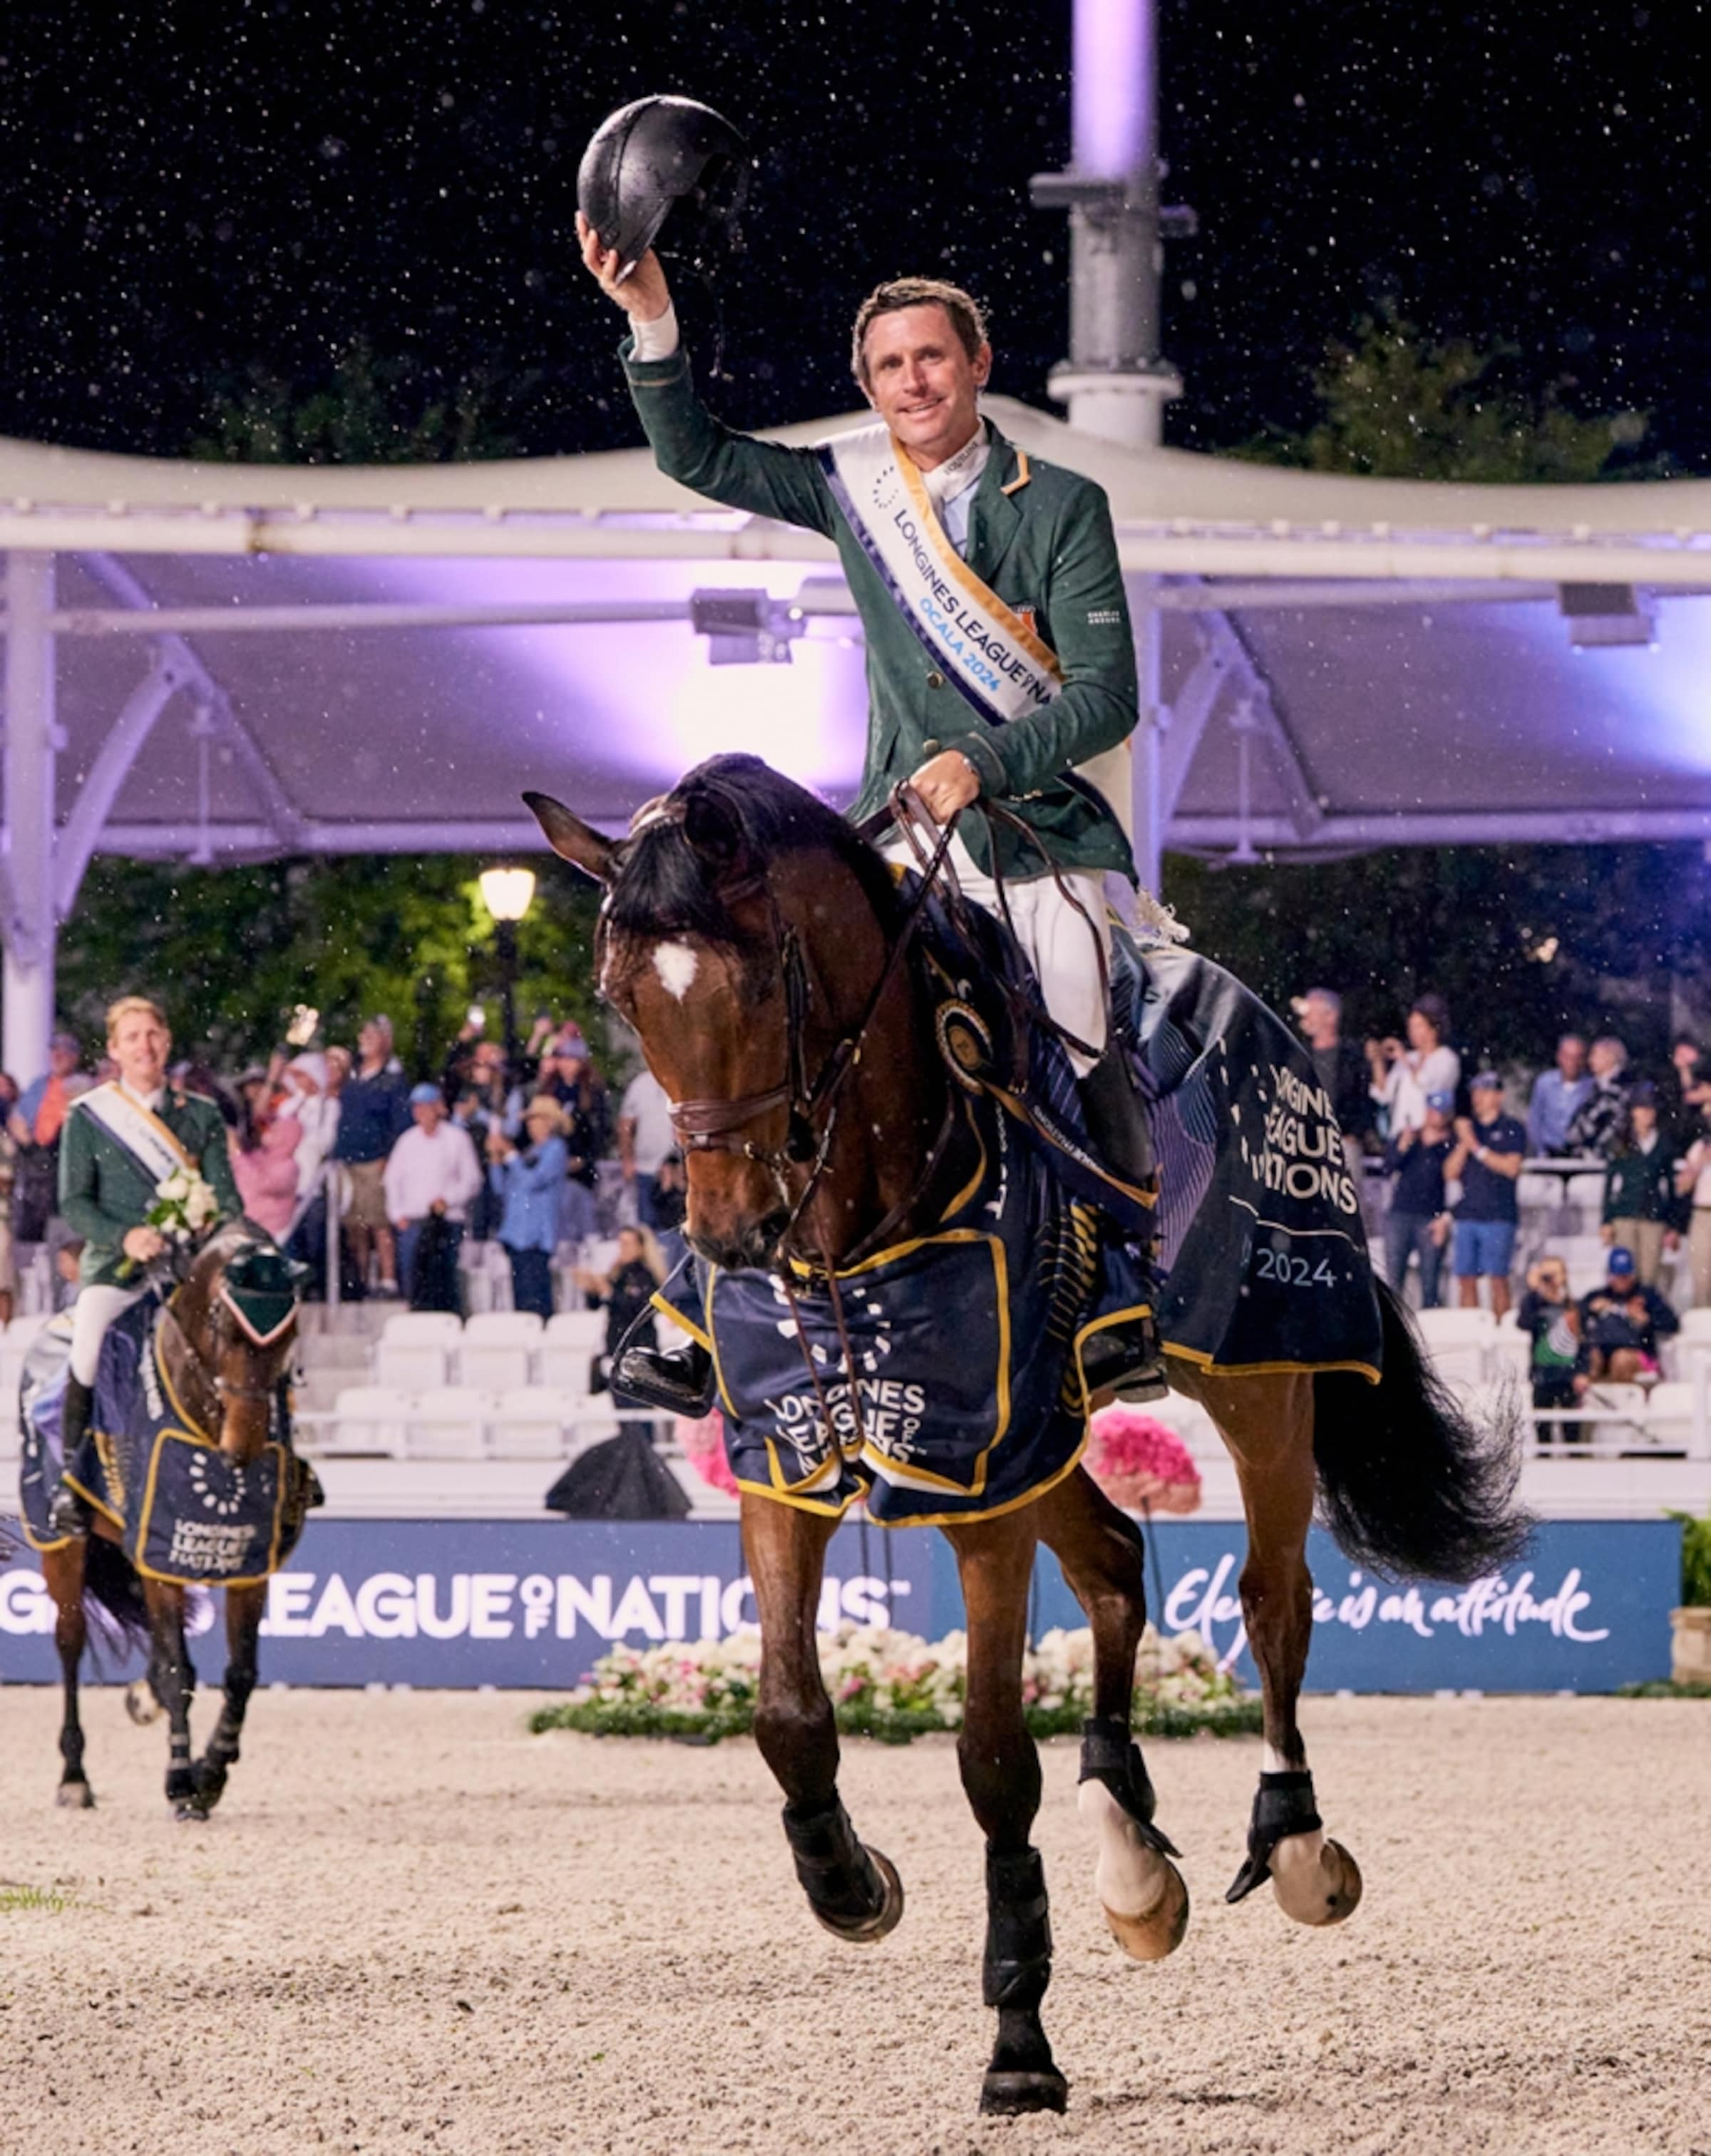 Longines-League-of-Nations_1080x1360